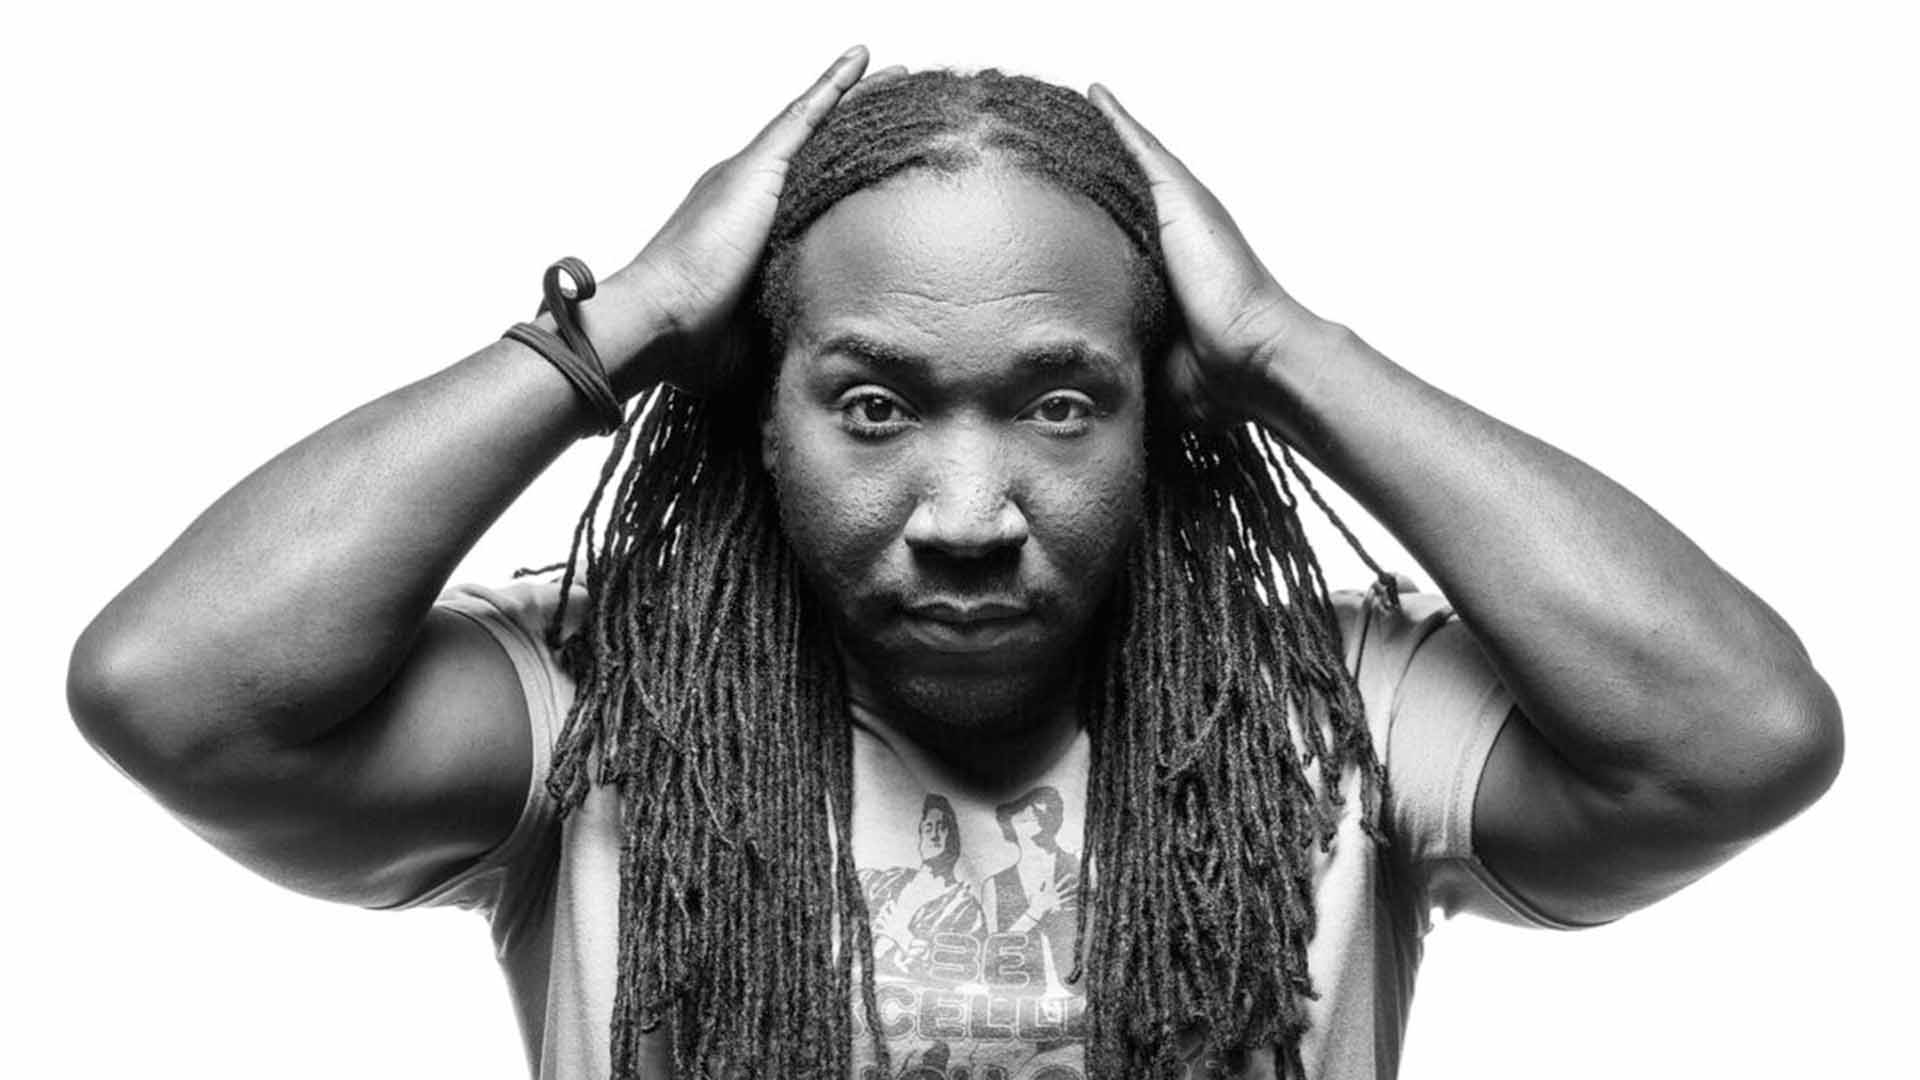 headshot portrait of an actor with dreadlocks black and white